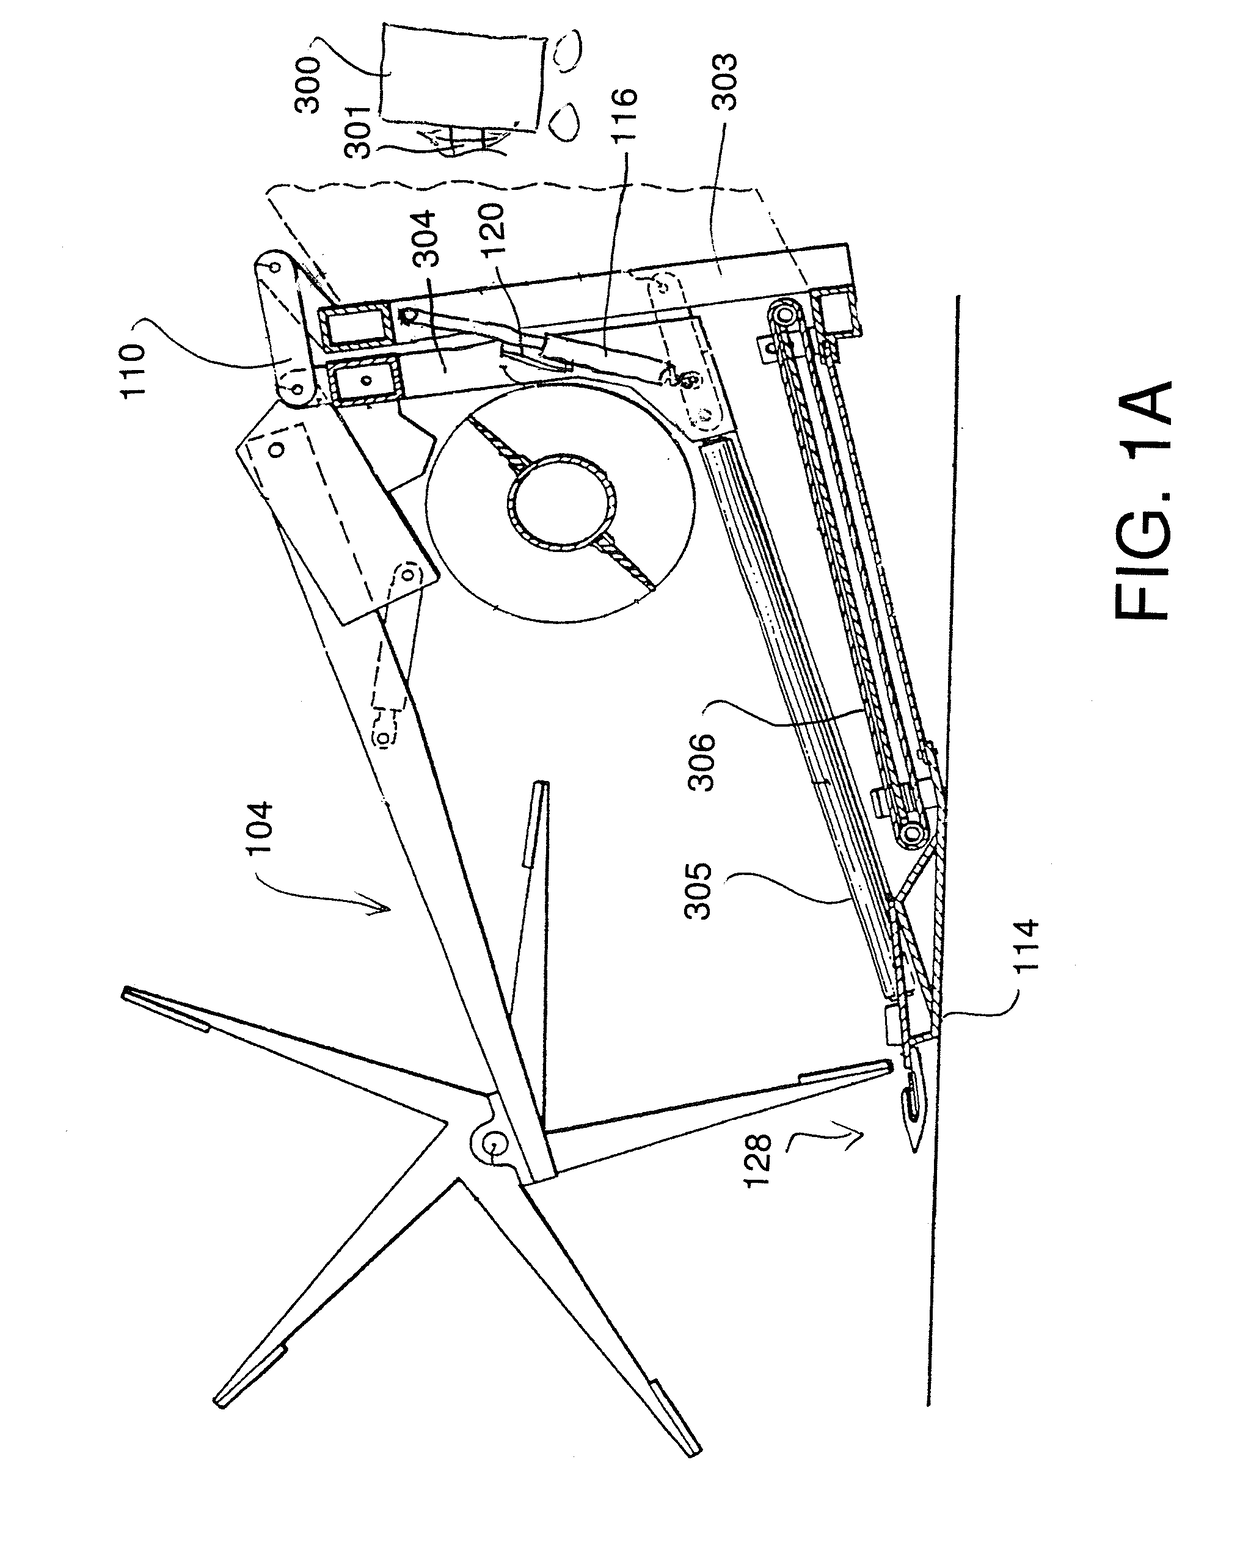 Crop Machine with an Electronically Controlled Hydraulic Cylinder Flotation System